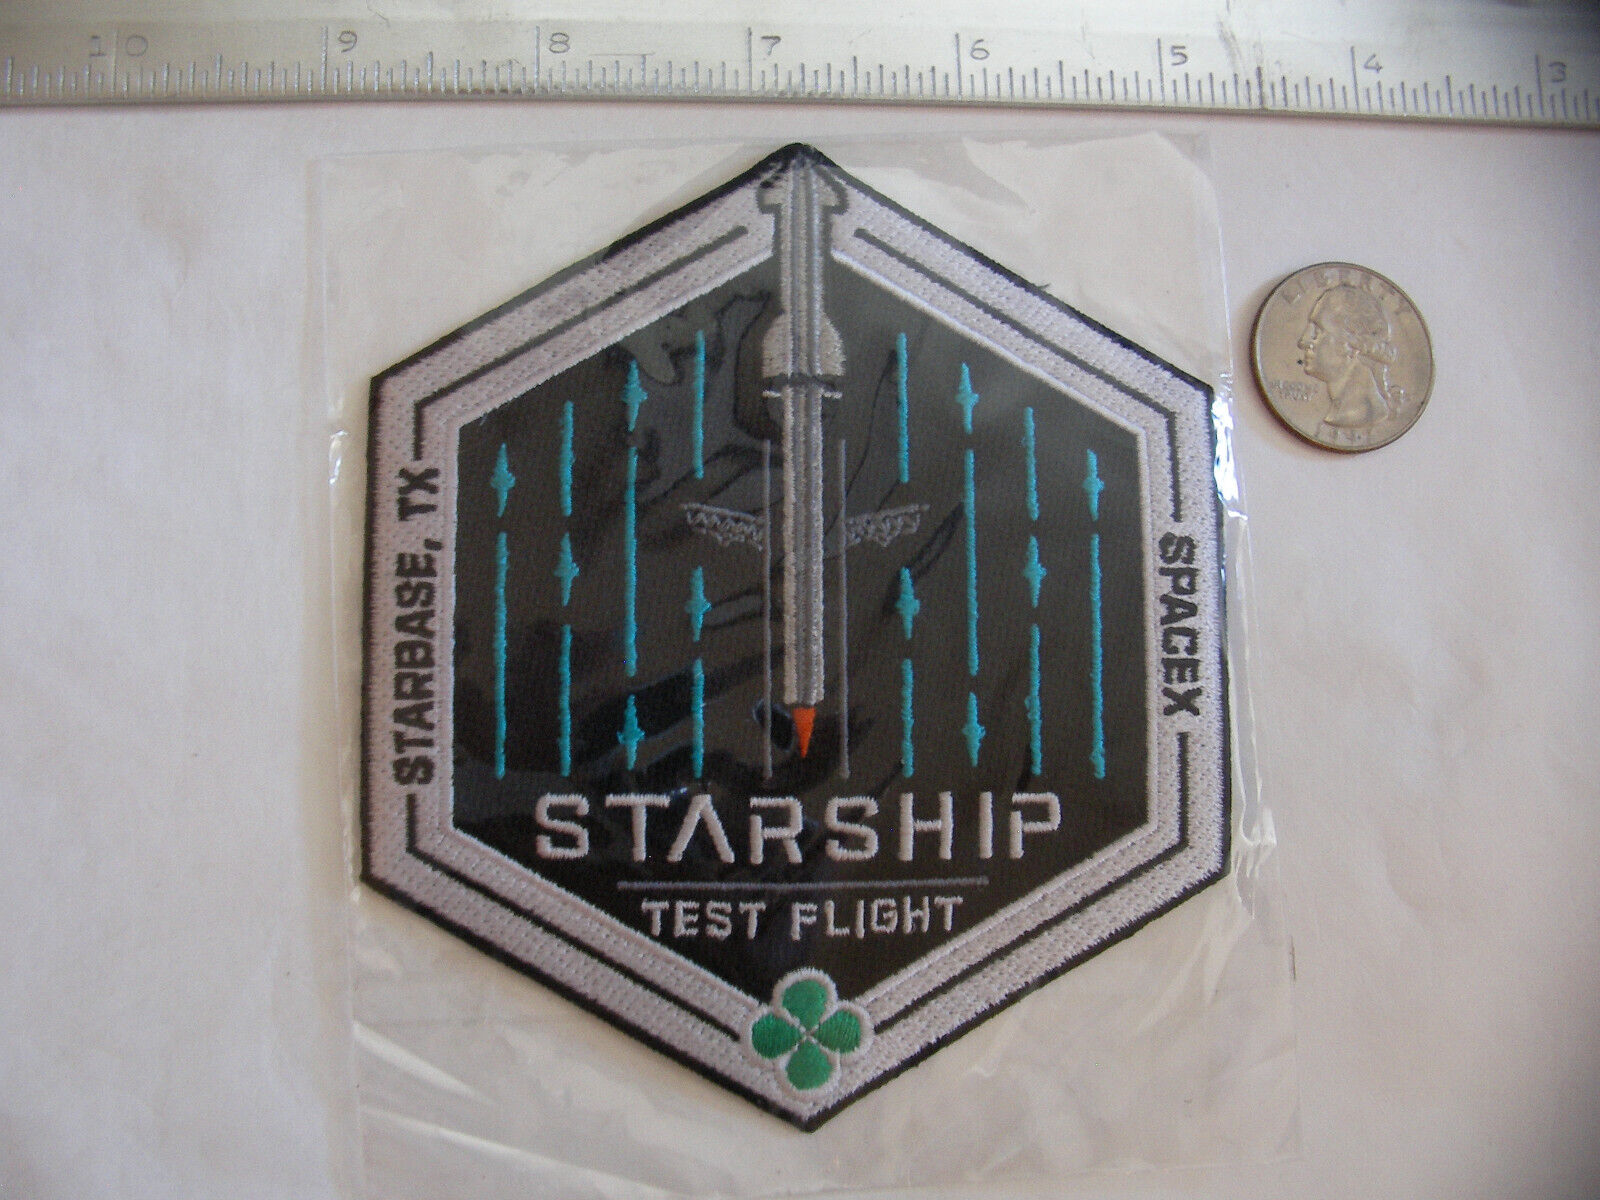 Authentic SpaceX Starship Test Flight Patch Original Packaging